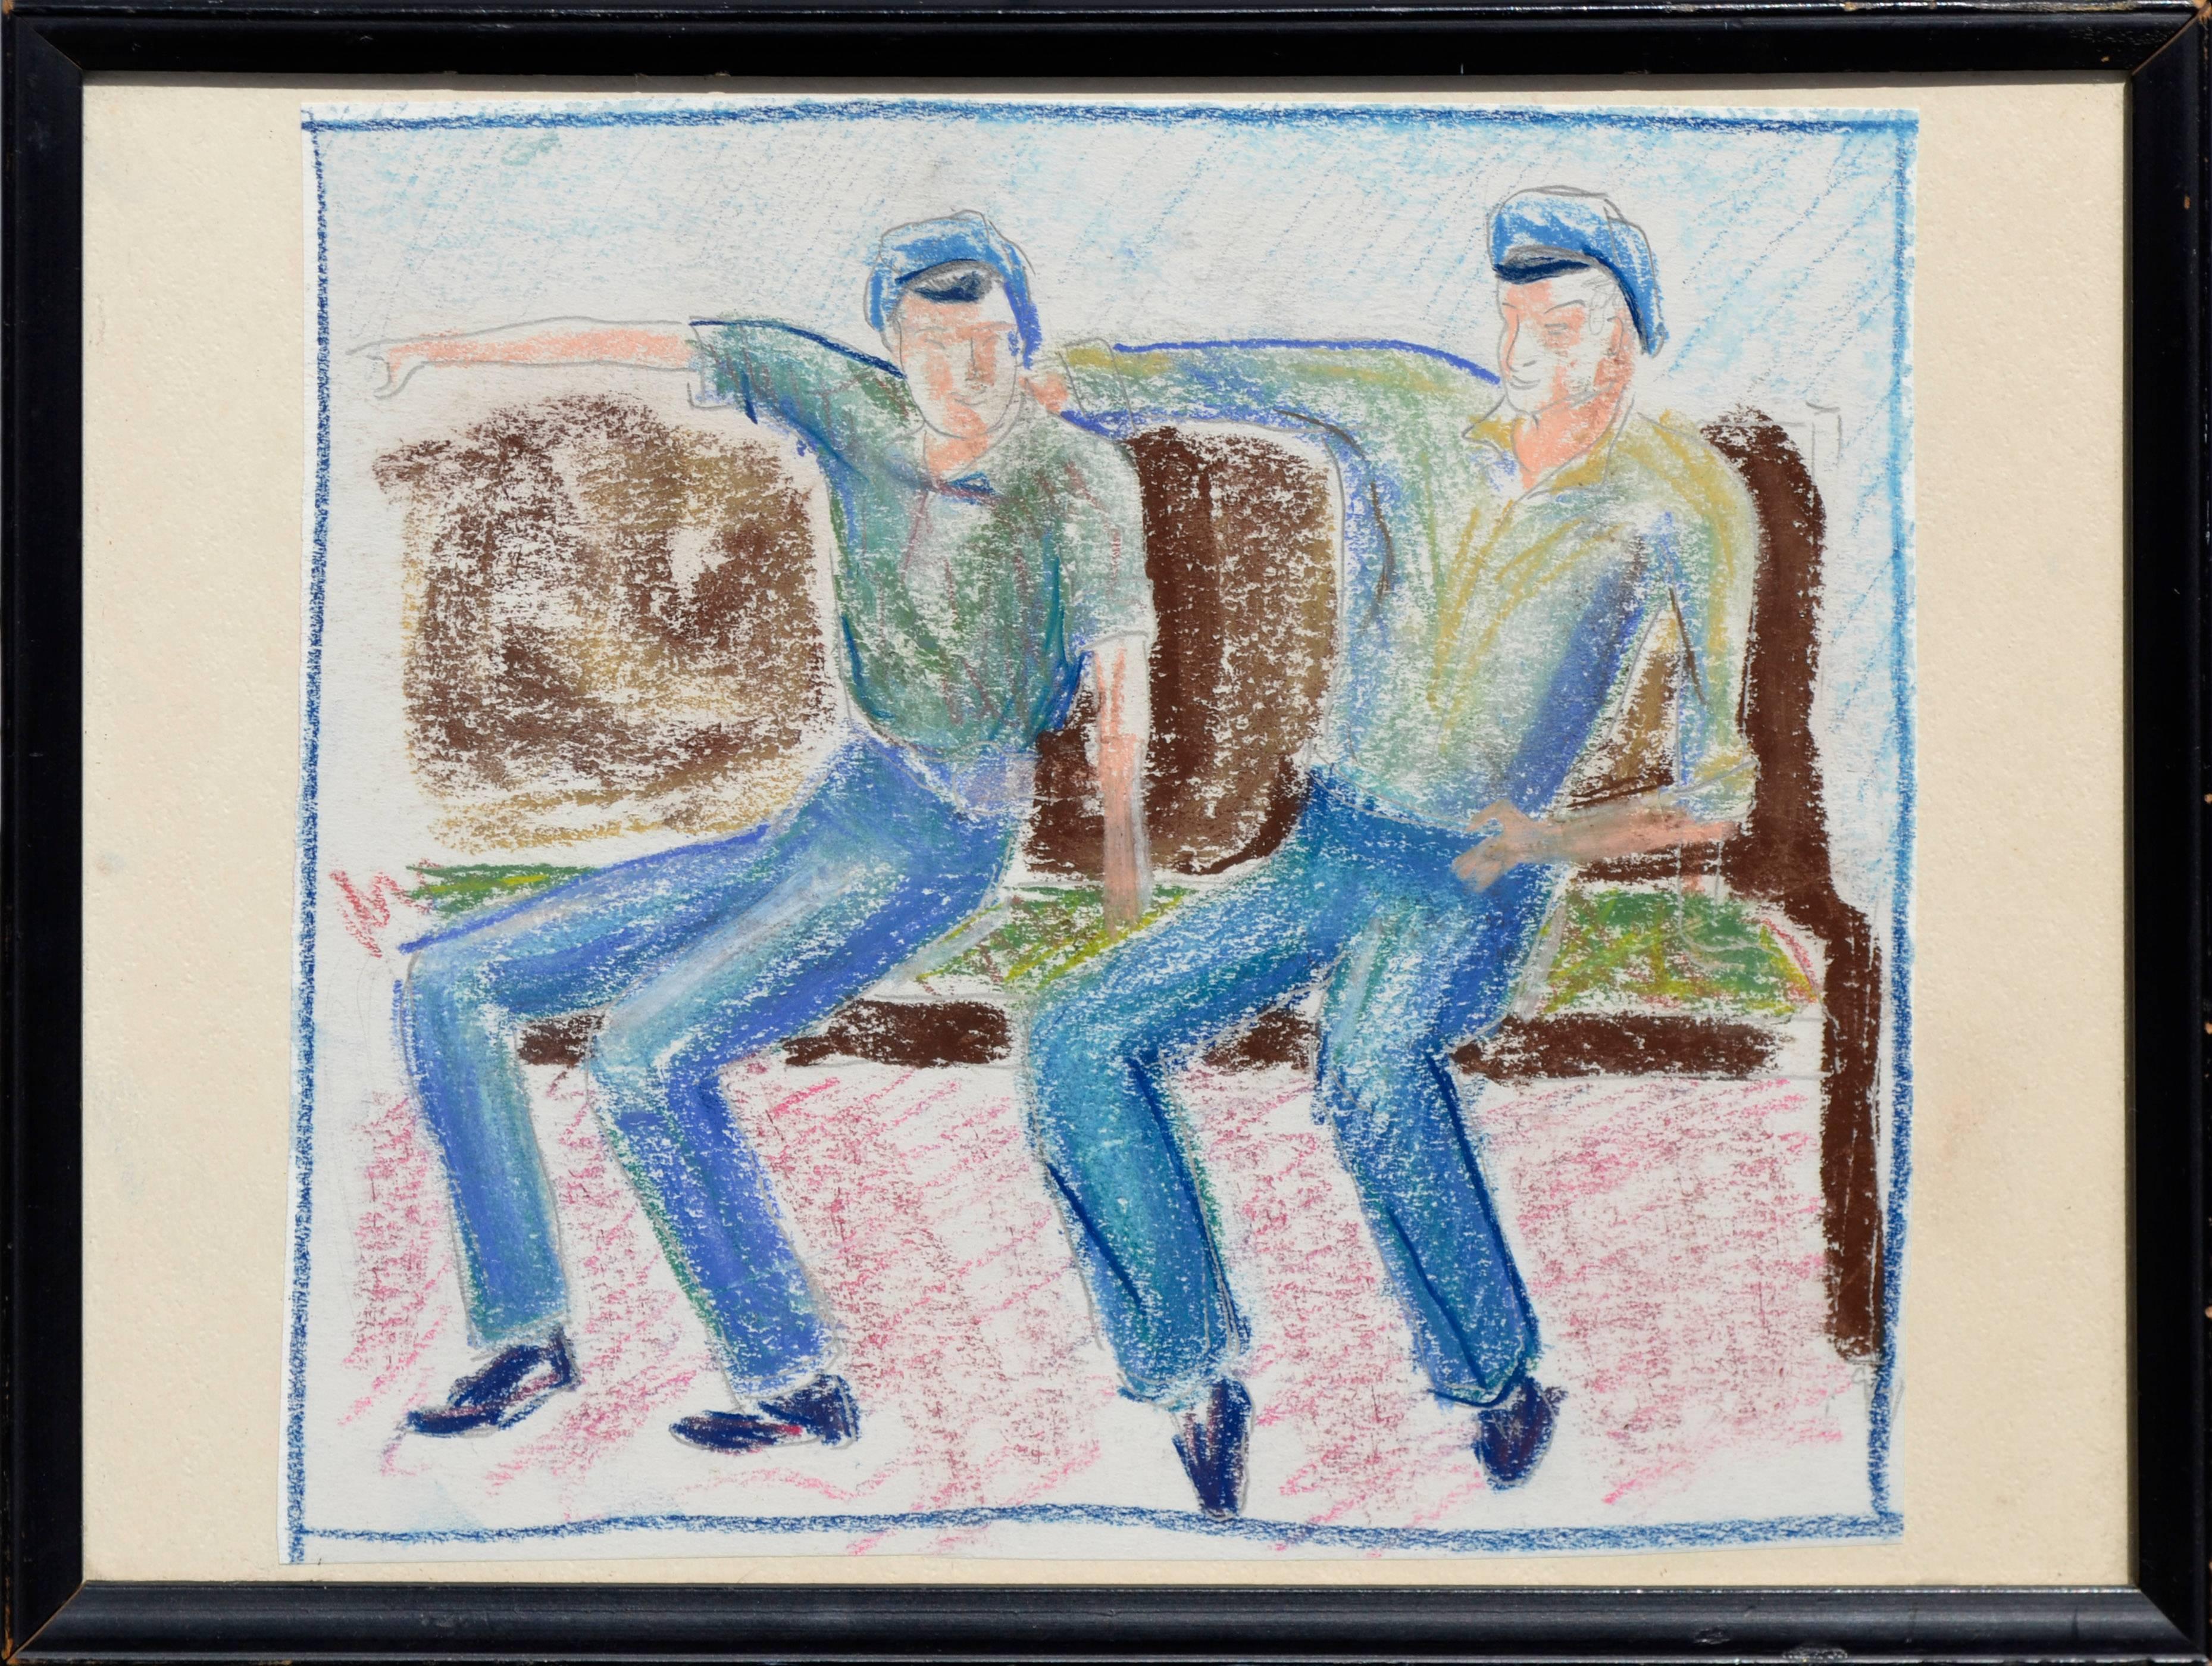 Pastel drawing of two men in uniform wearing berets by Clark Blocher. Circa 1940. Presented on an ivory mat board with rustic black wood frame. Image, 9.13"H x 9.75"W. 
Blocher was born at Kalispell Montana, and studied at the university of Kansas.